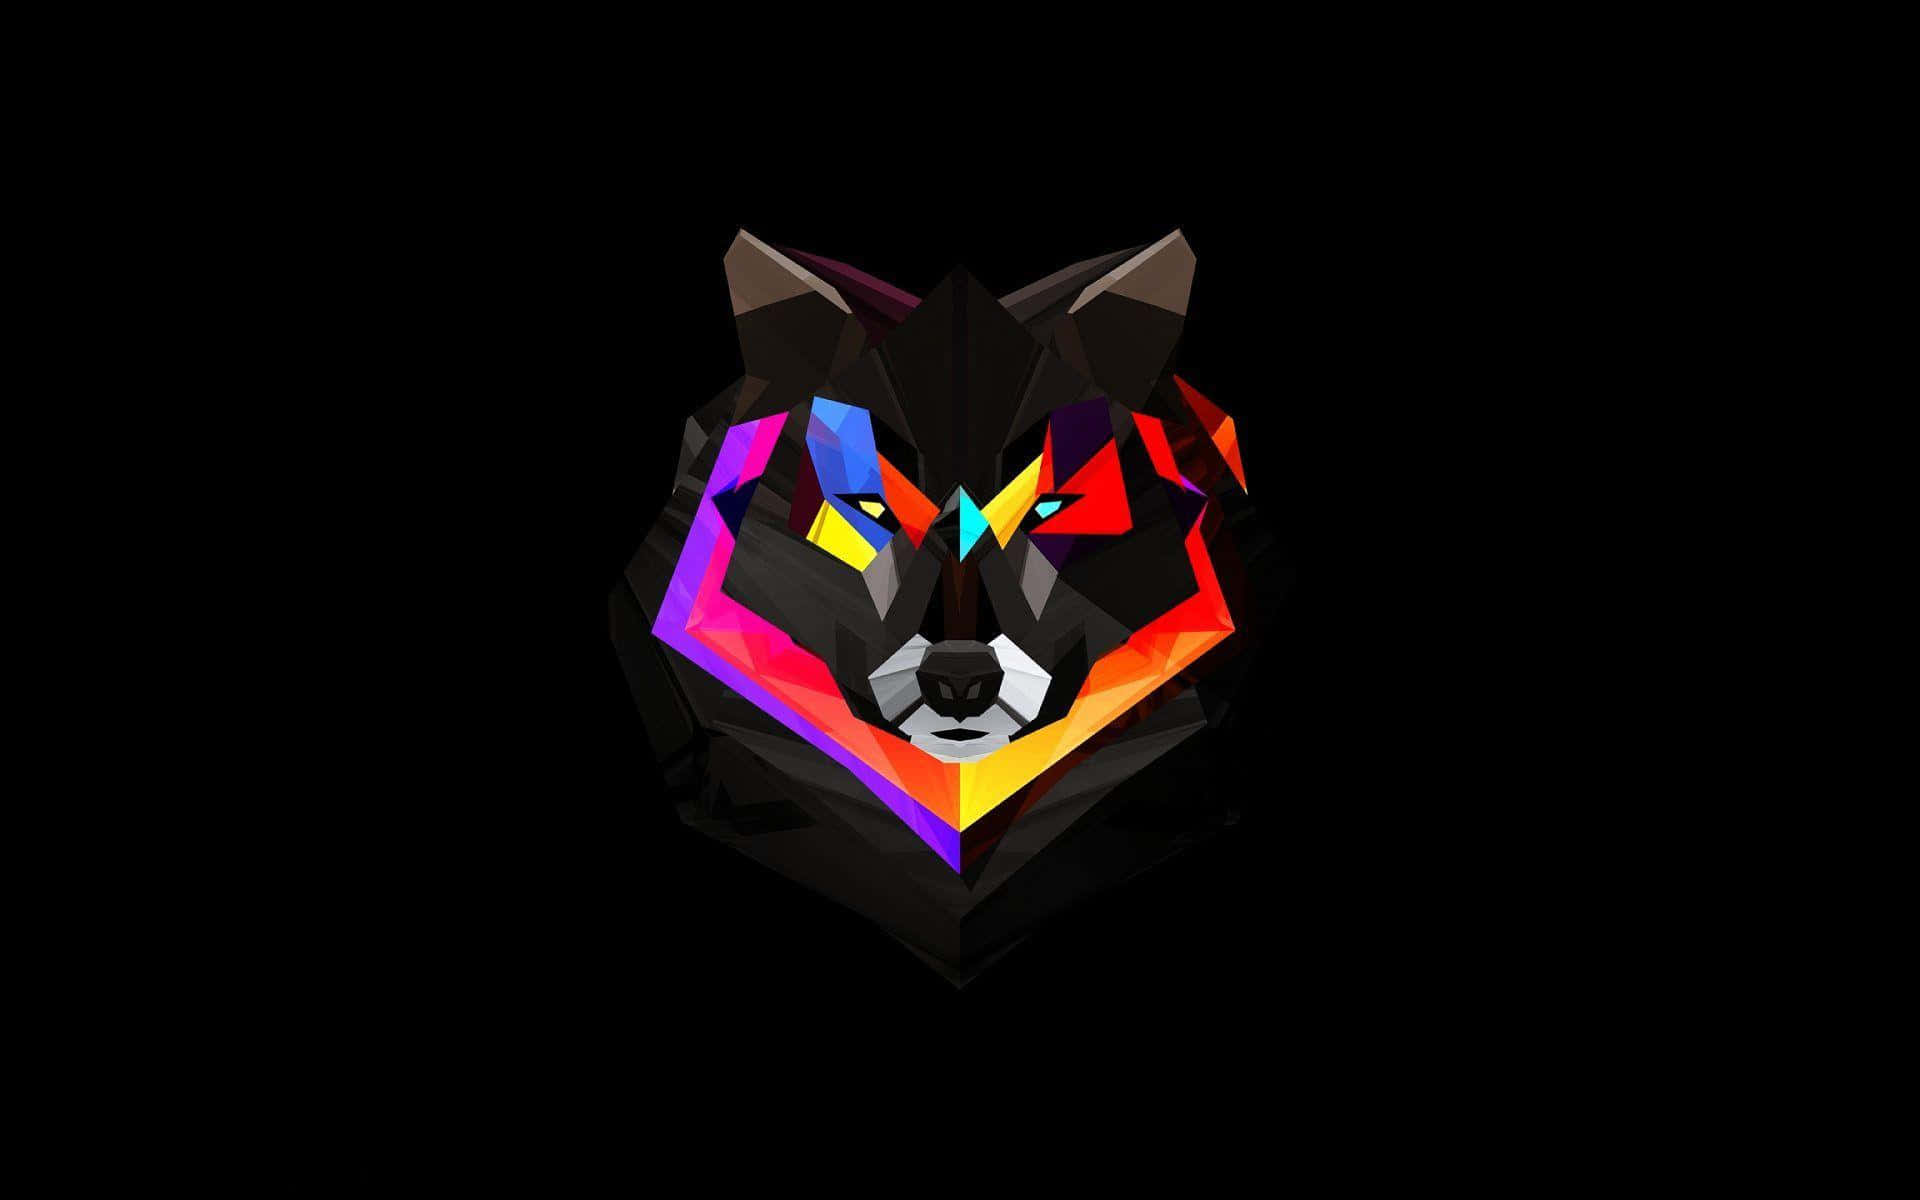 3D iPhone Wallpaper on X Cool Wolf Wallpaper for iPhone  httpstcoOsWPpeTrl2 httpstcoG3R48noMyZ  X